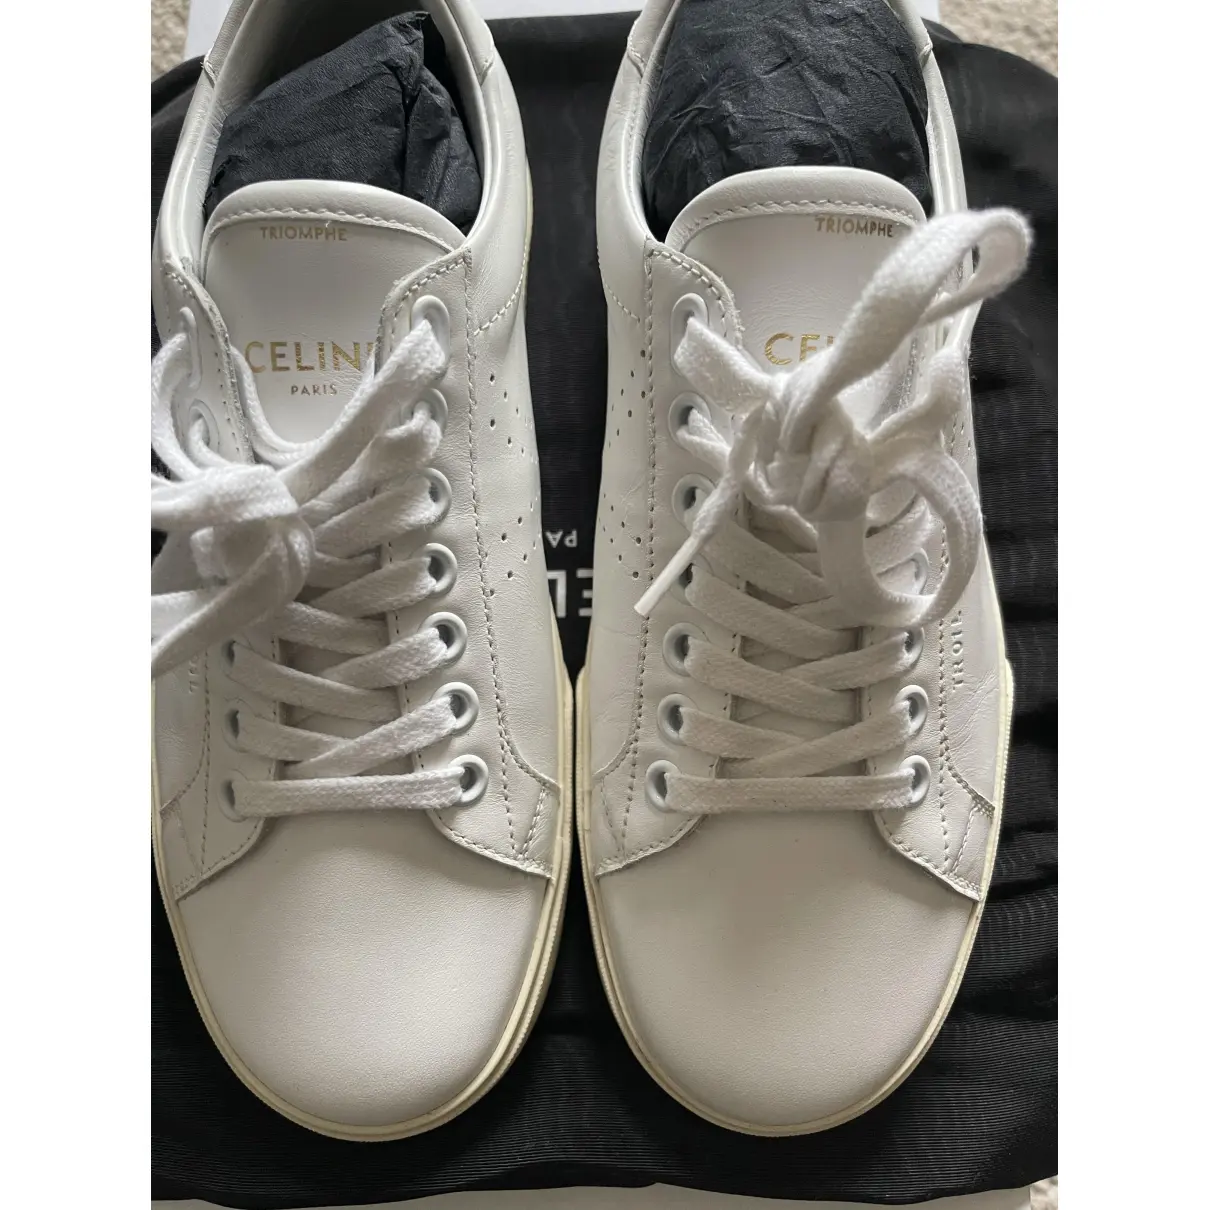 Buy Celine Triomphe leather trainers online